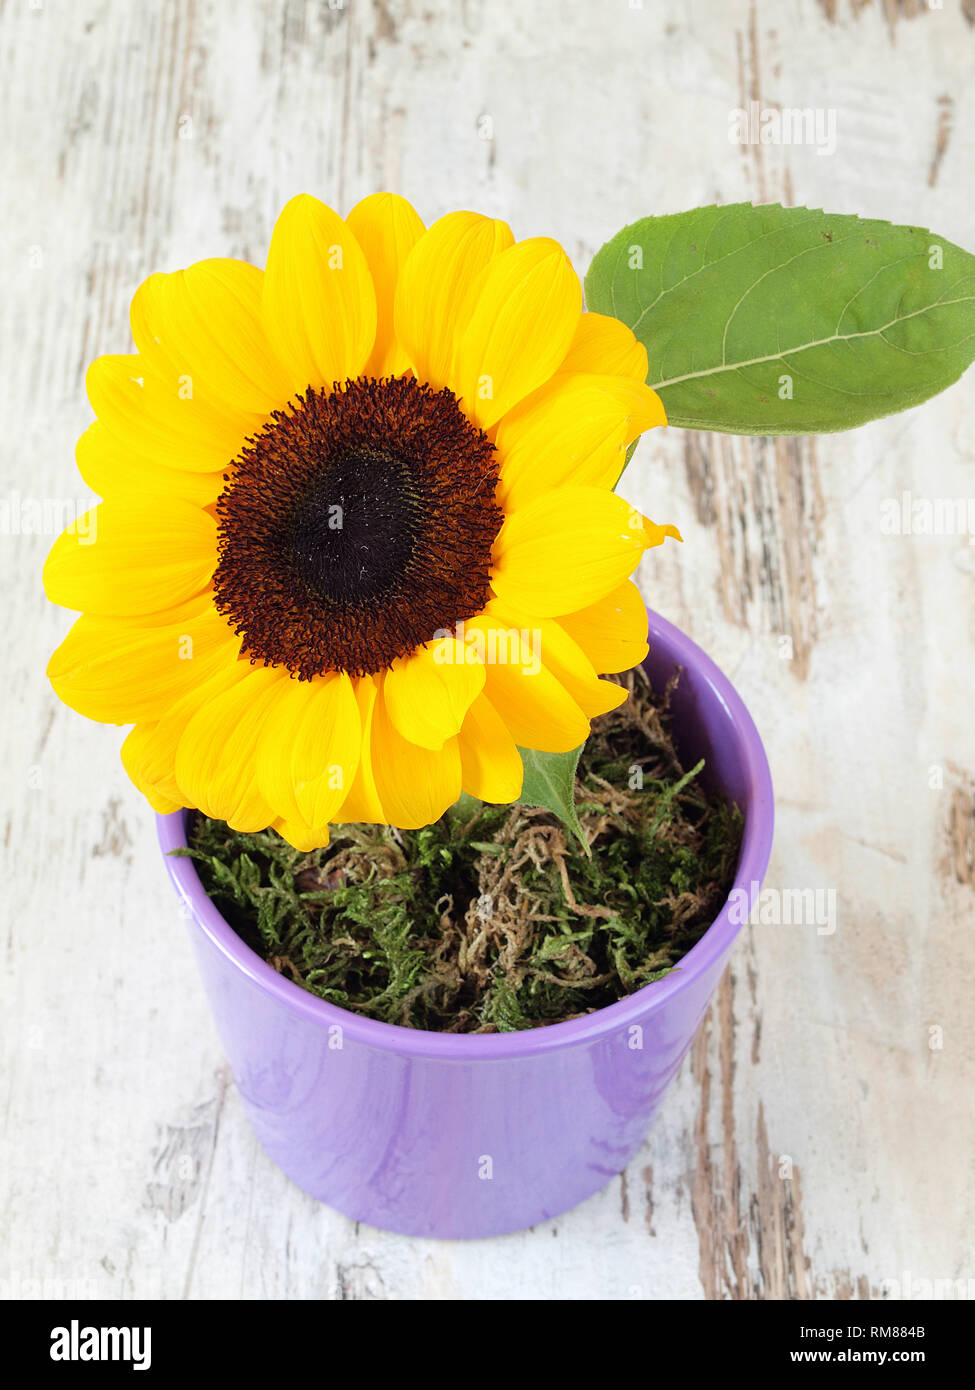 Sunflower in the pot Stock Photo